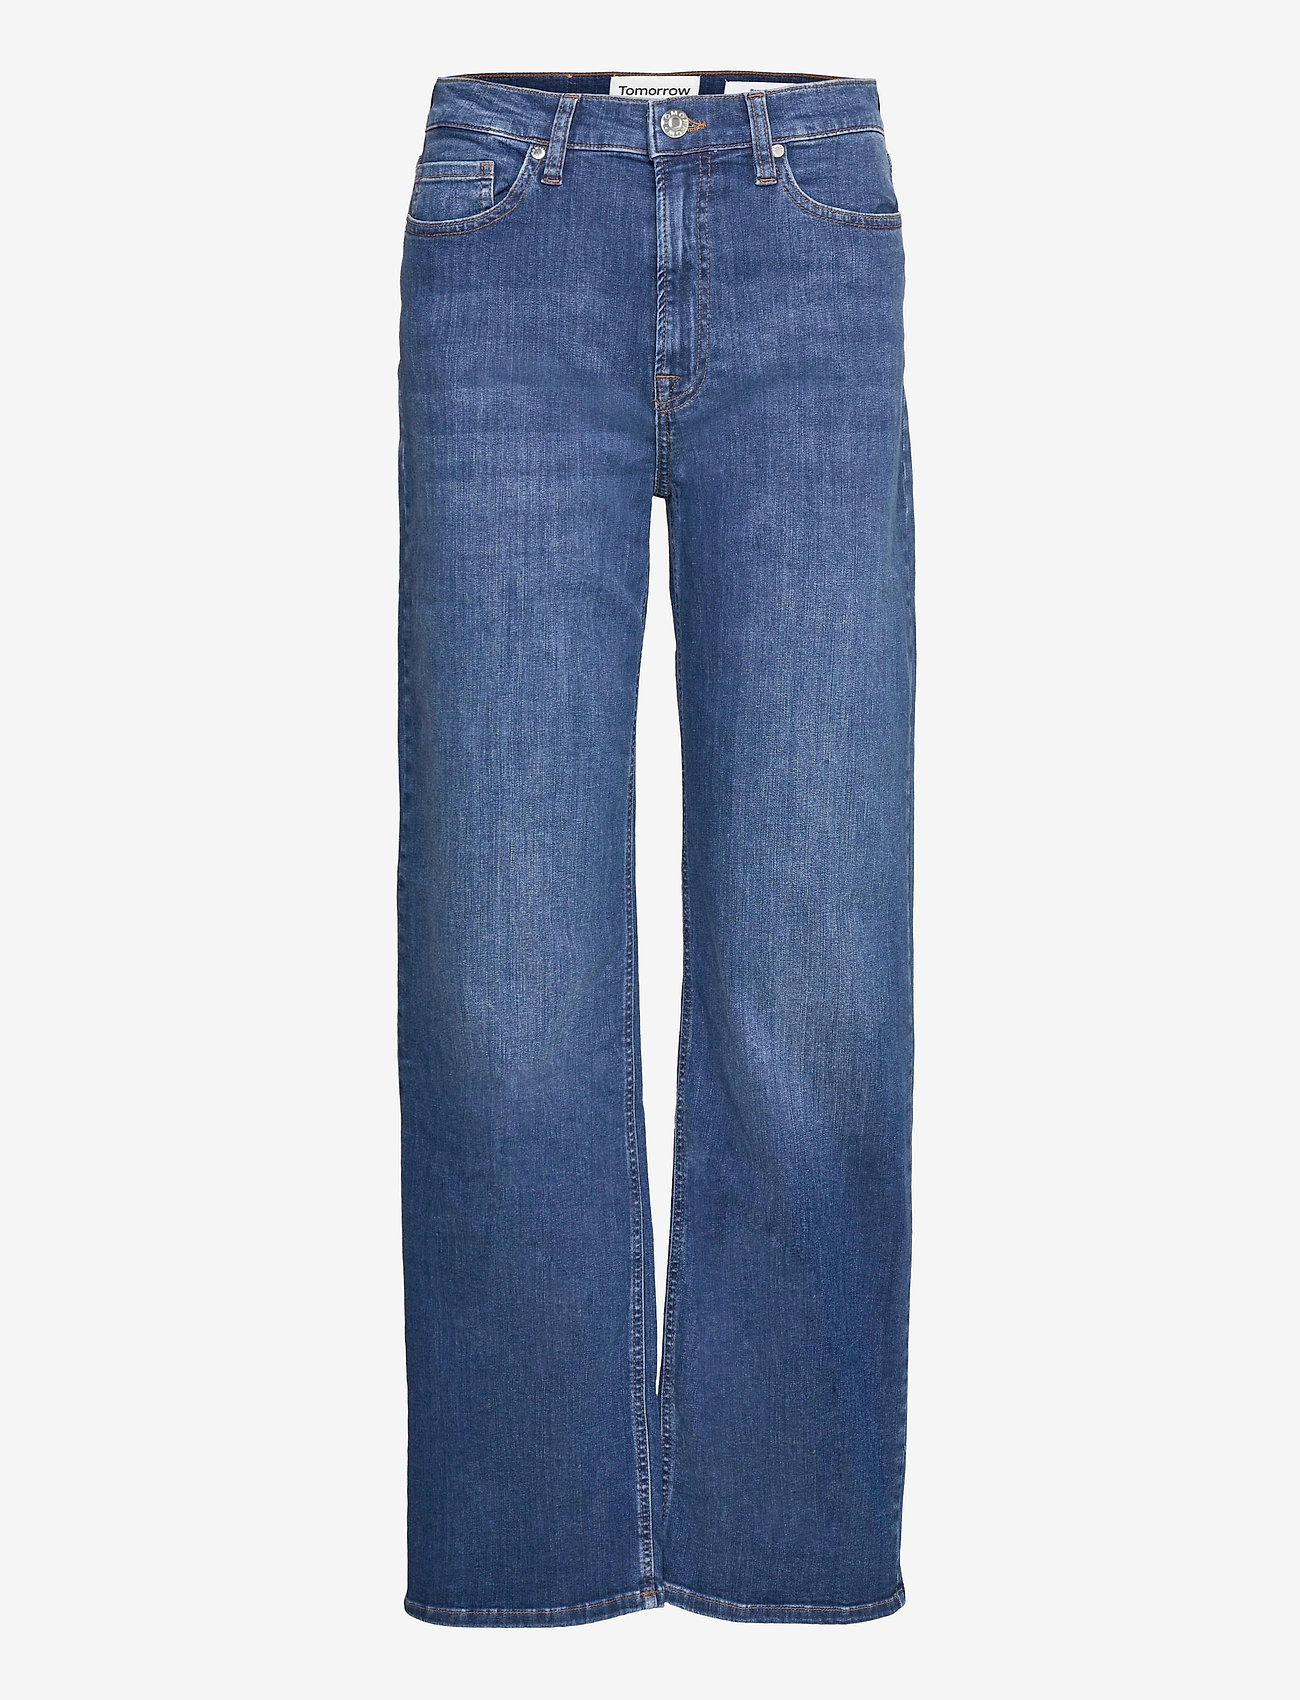 Tomorrow - Brown straight jeans wash Florence - denim blue - 0